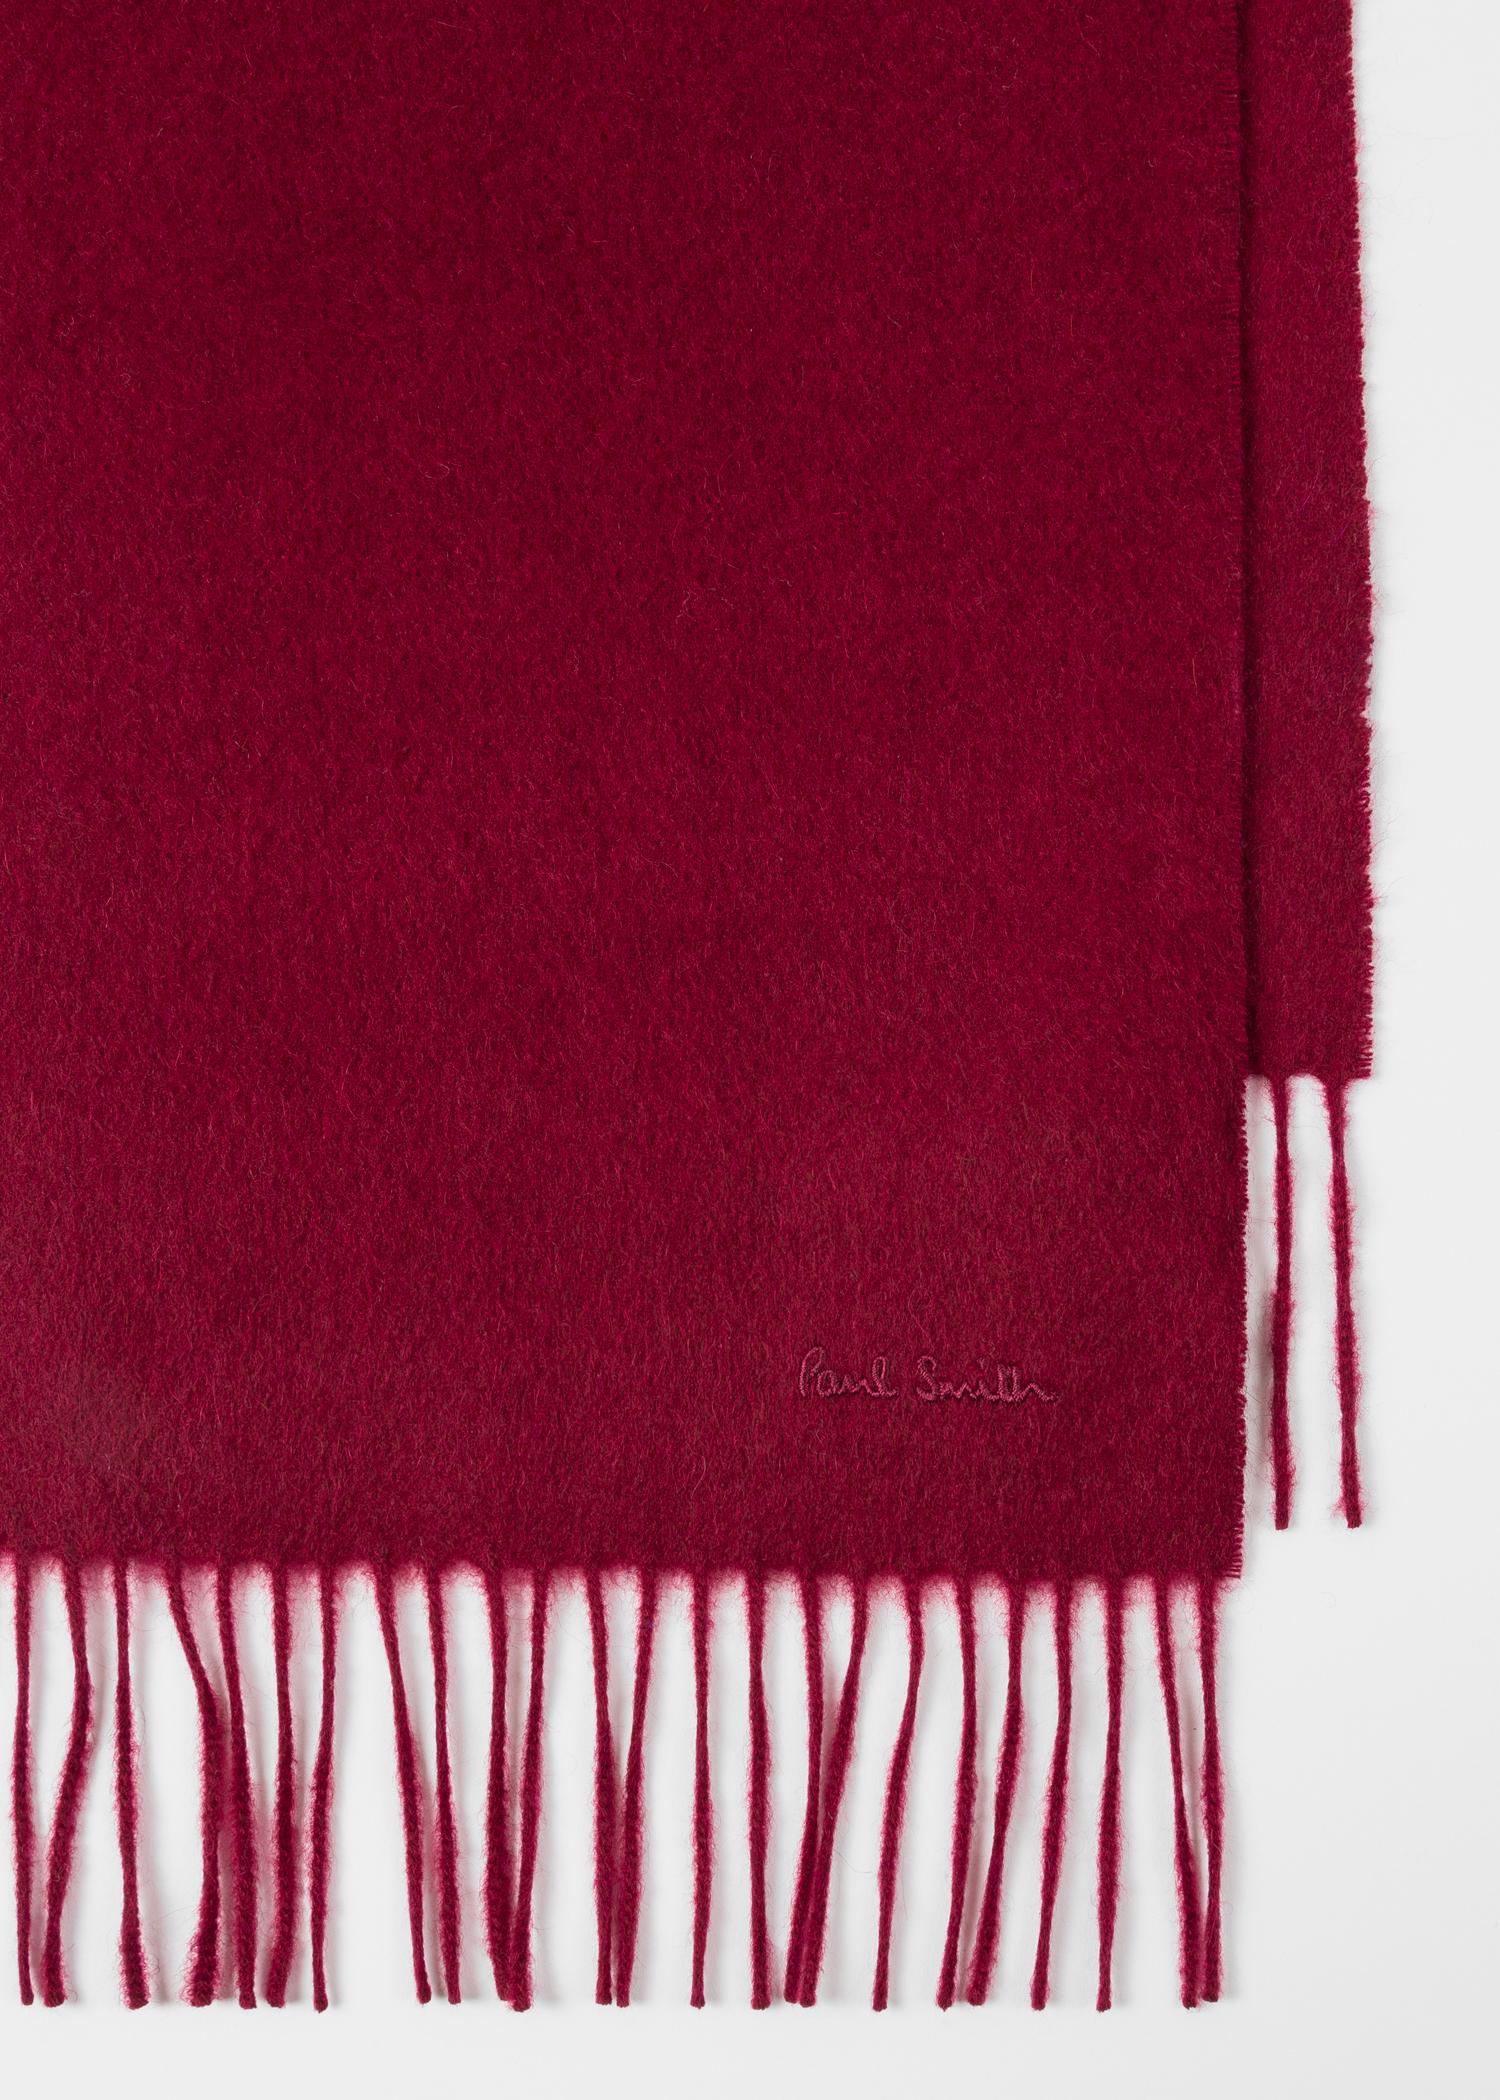 Paul Smith Men's Red Cashmere Scarf in Red - Save 22% - Lyst